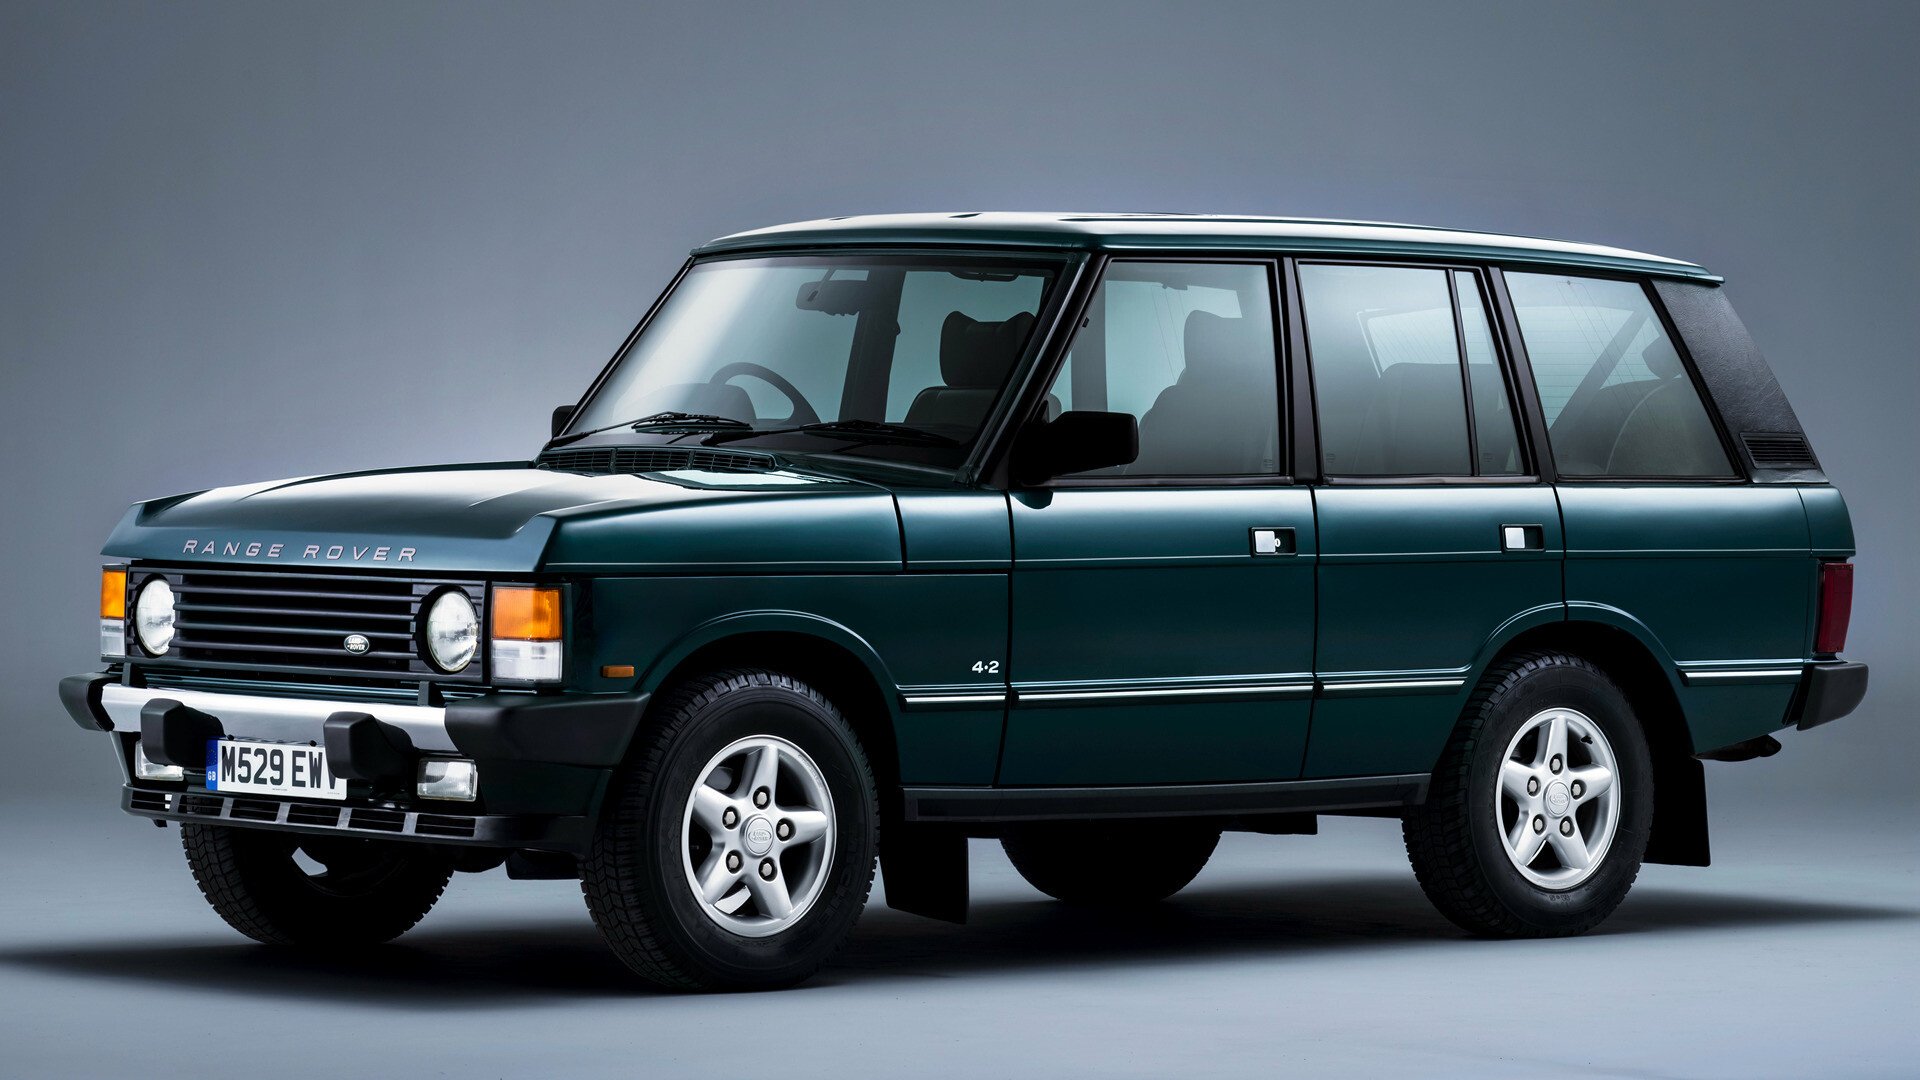 Range Rover: 1994 model Classic Autobiography, Luxurious modern classic 4x4. 1920x1080 Full HD Background.